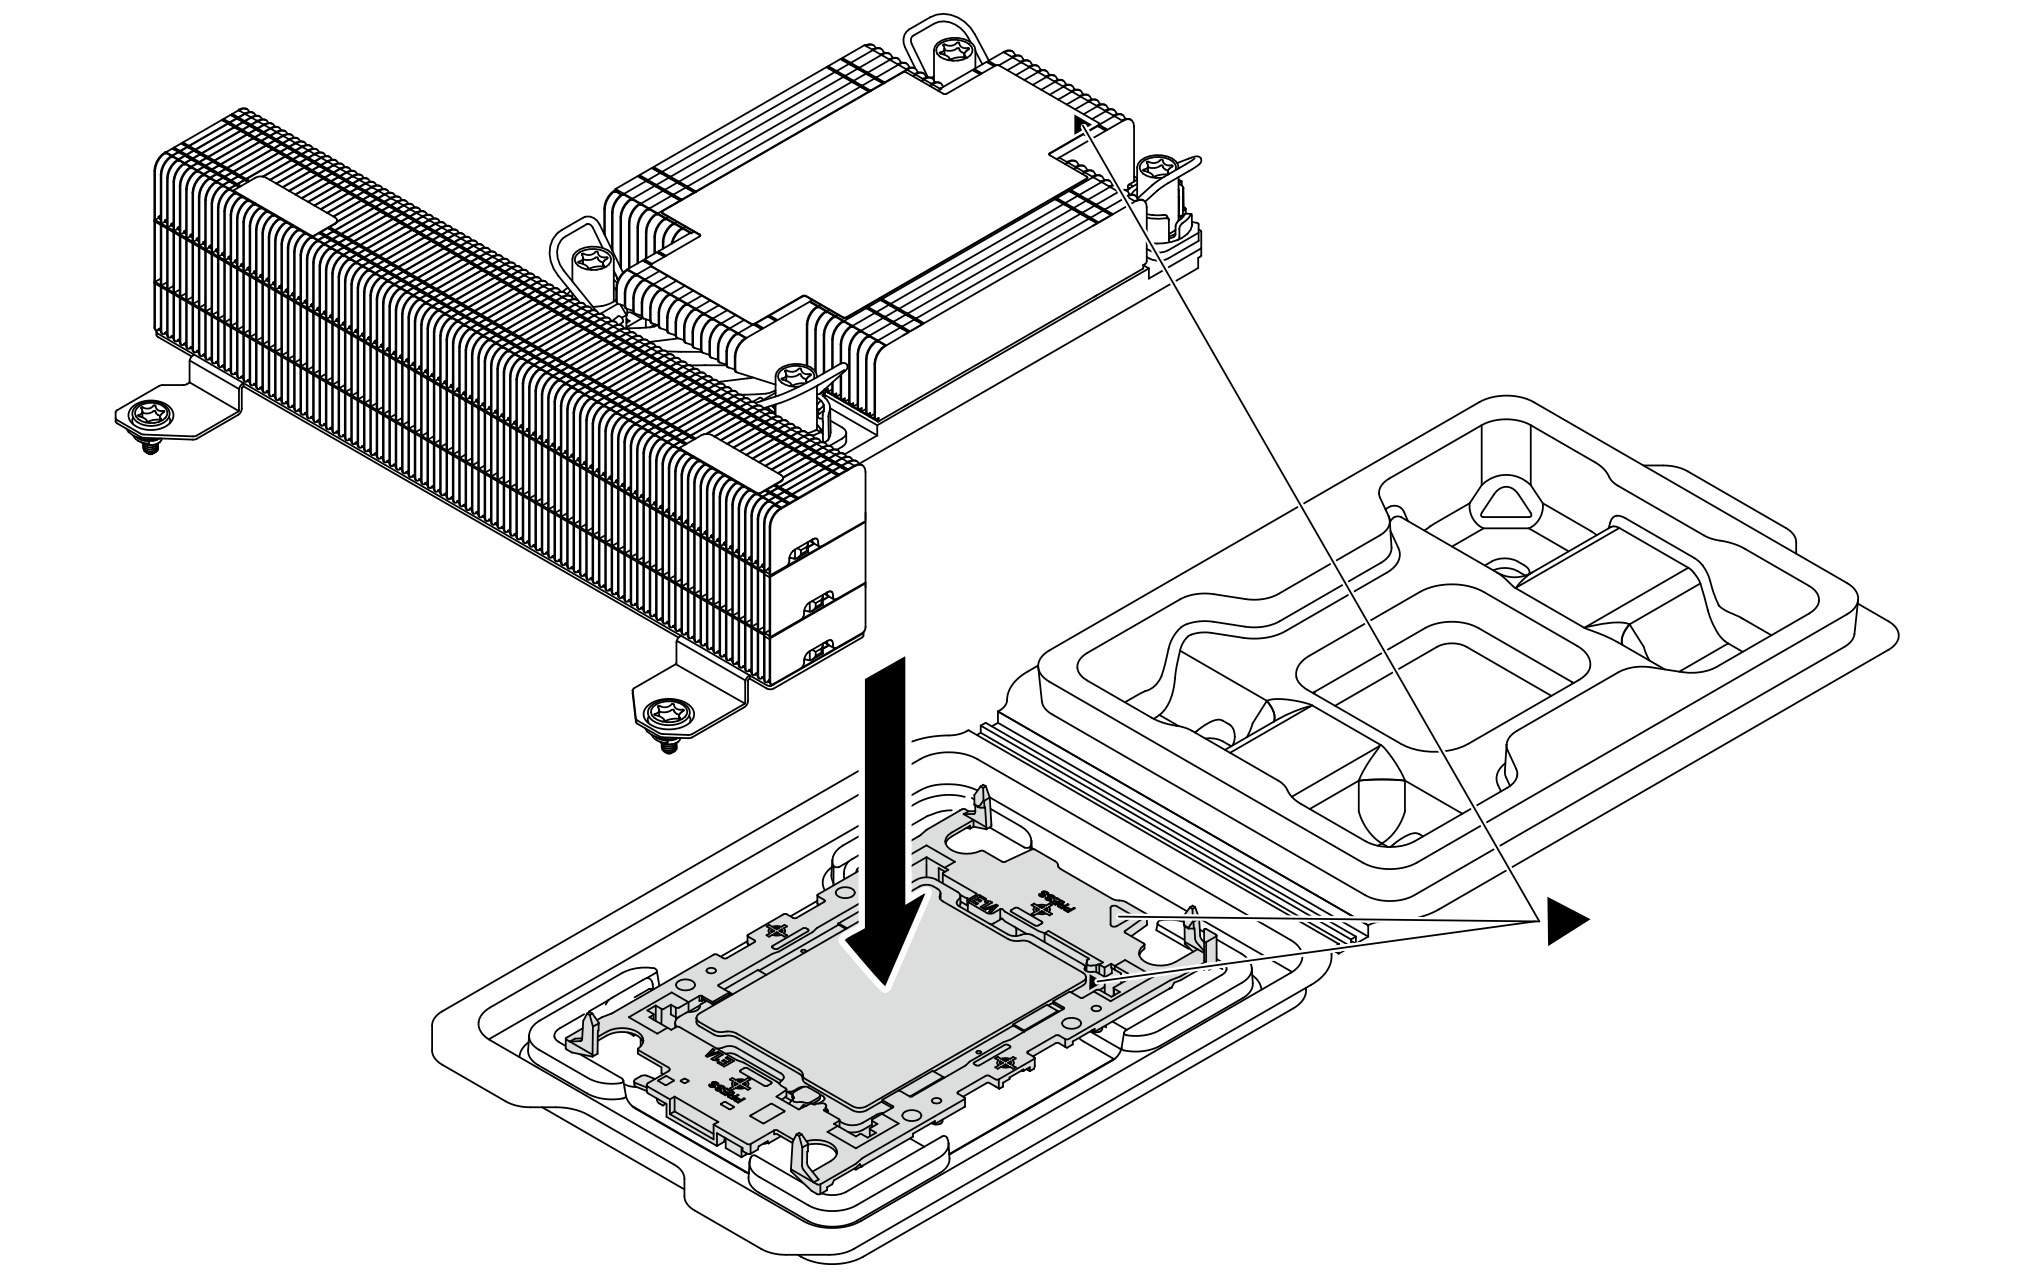 Assembling the PHM with processor in shipping tray